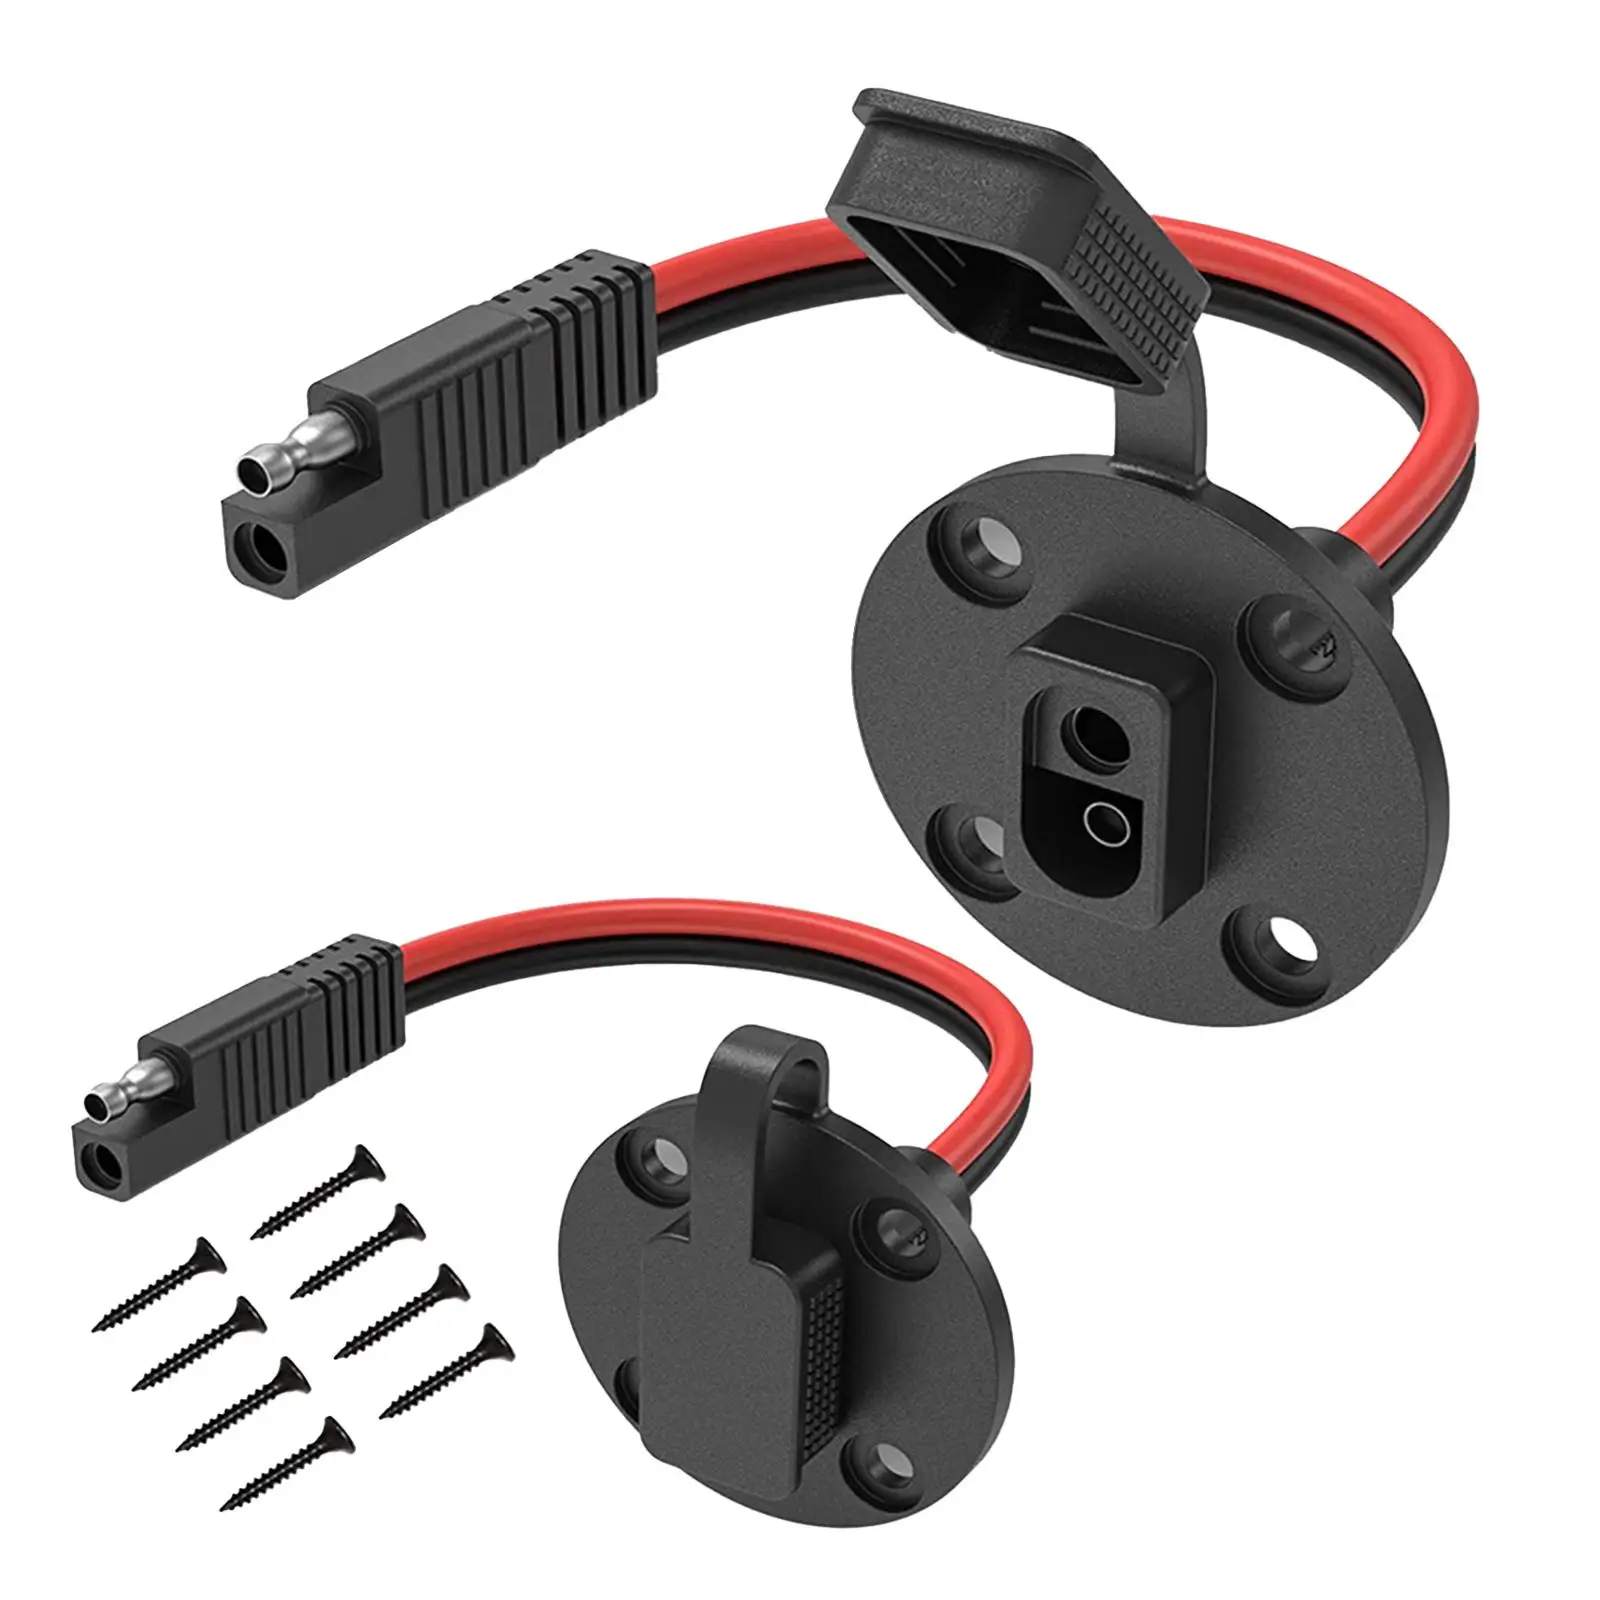 2x SAE Socket Cars Quick Connect Disconnect Accessories RV 12AWG Boats Heavy Duty Connector Cables Sidewall Port Battery Cables